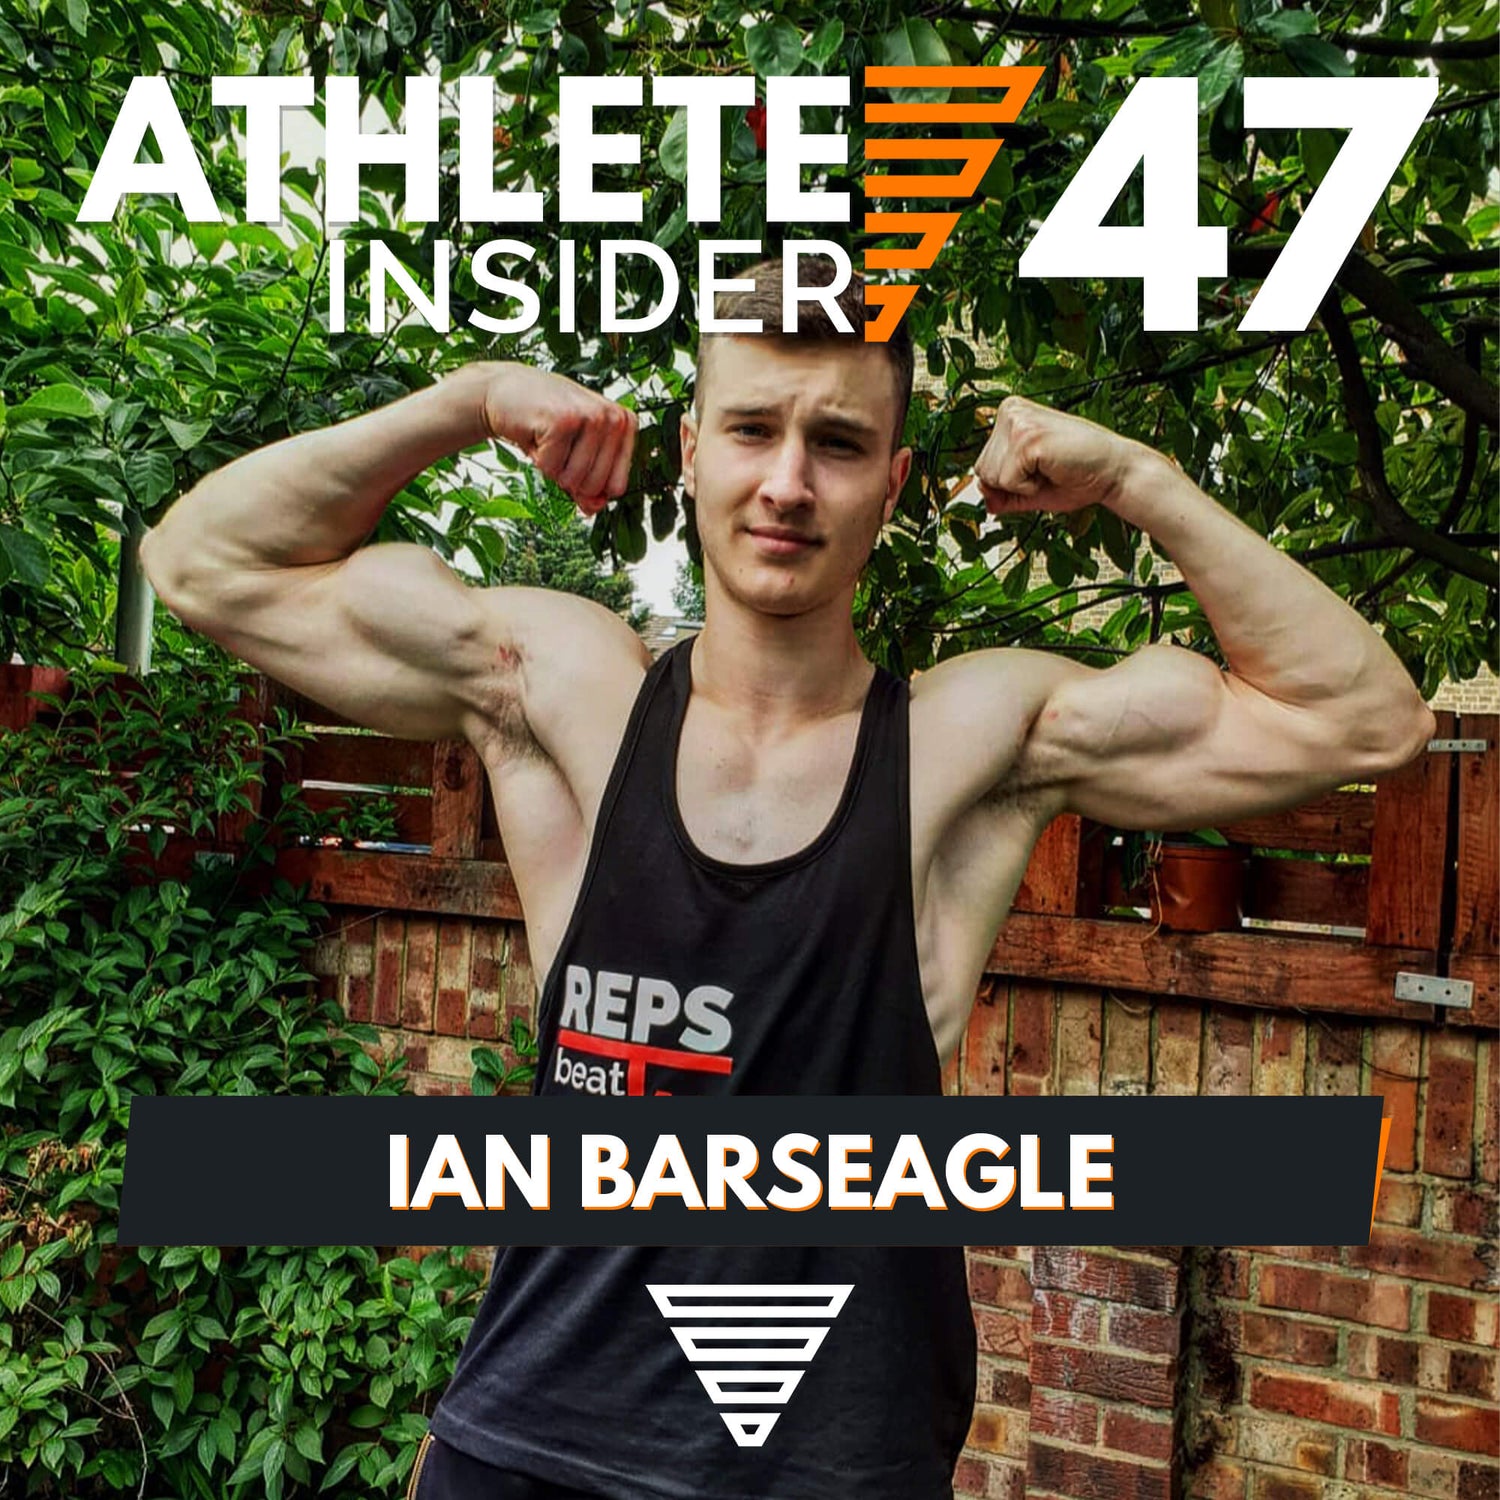 IAN BARSEAGLE | 1,88m Full Planche in 4 Months | Interview | The Athlete Insider Podcast #47